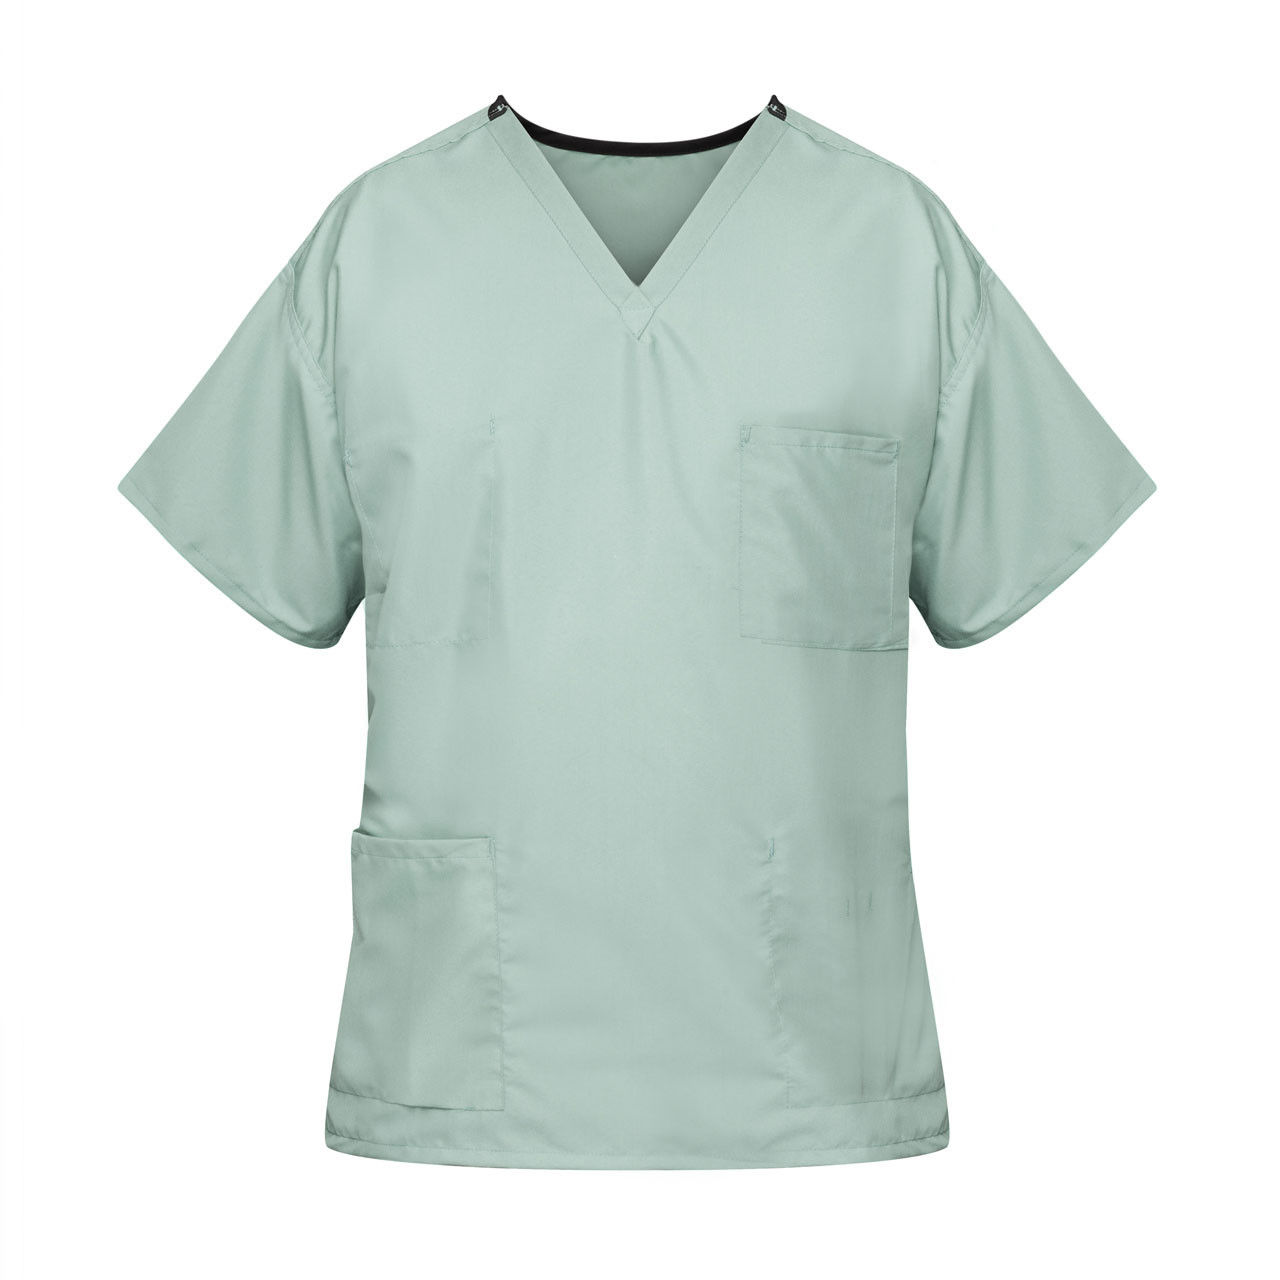 What material is used for the misty green scrubs?